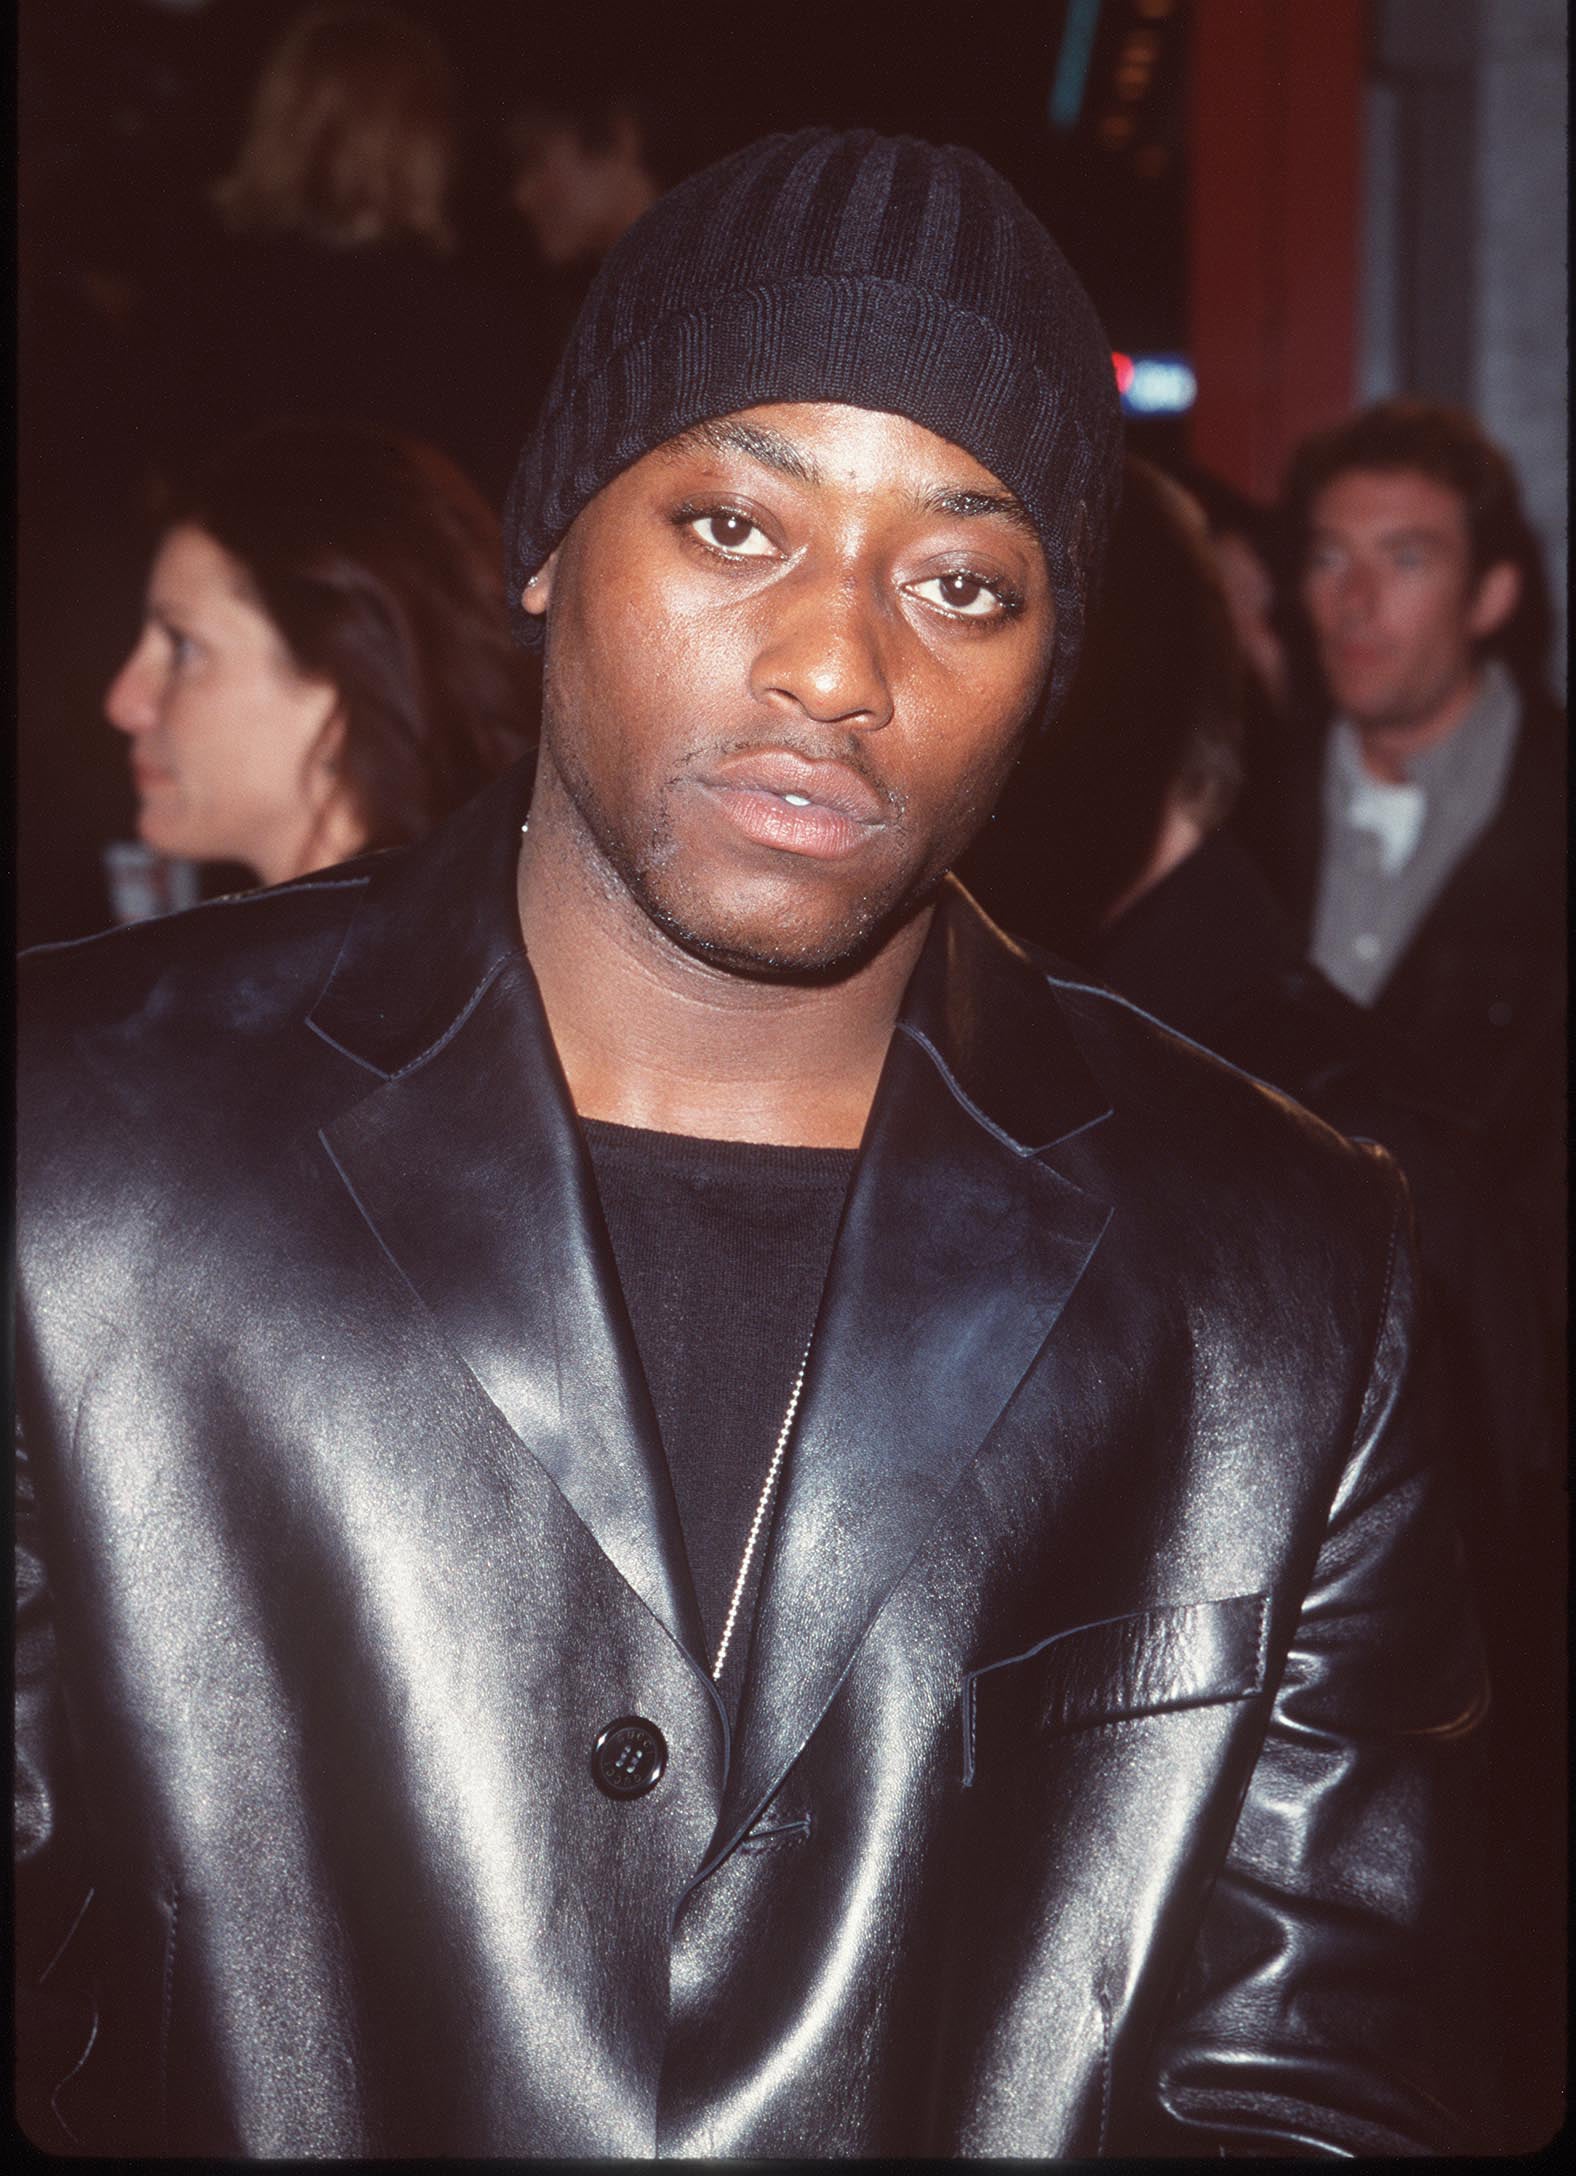 19 Photos Of Omar Epps Then and Now That Prove He'll Always Be Bae
